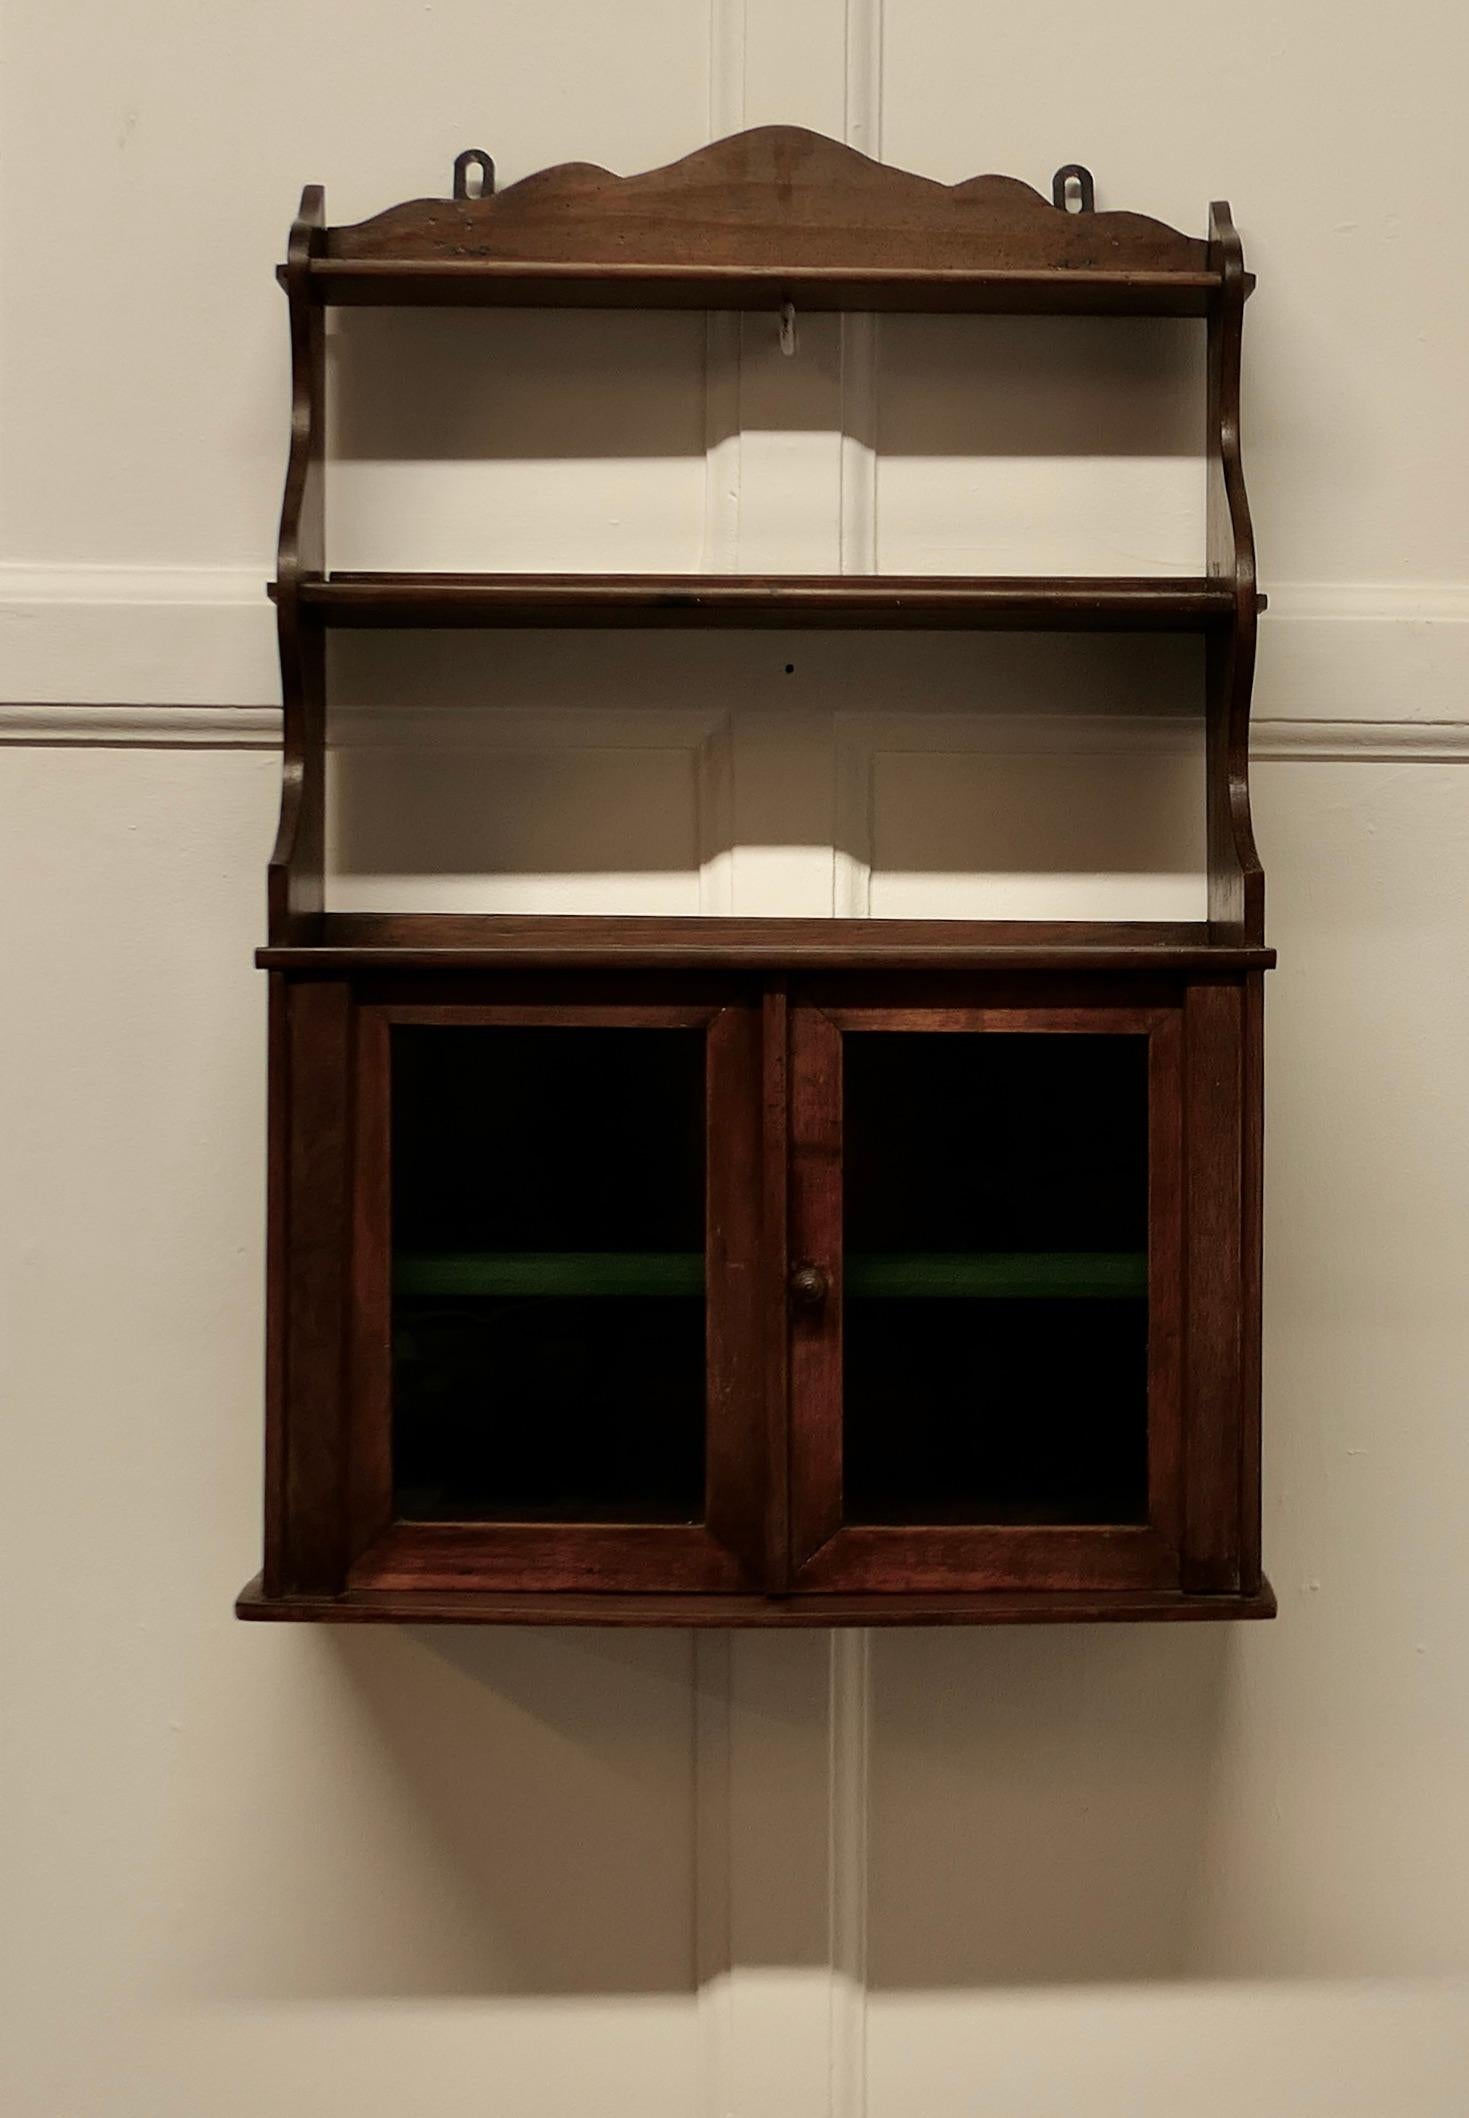 Wall Hanging Walnut Cloakroom or Bathroom Cupboard 

A very useful bathroom cabinet the cupboard has two glazed doors enclosing a shelf and 2 shelves above
It would work very well in a small Cloakroom where space is limited or a traditionally